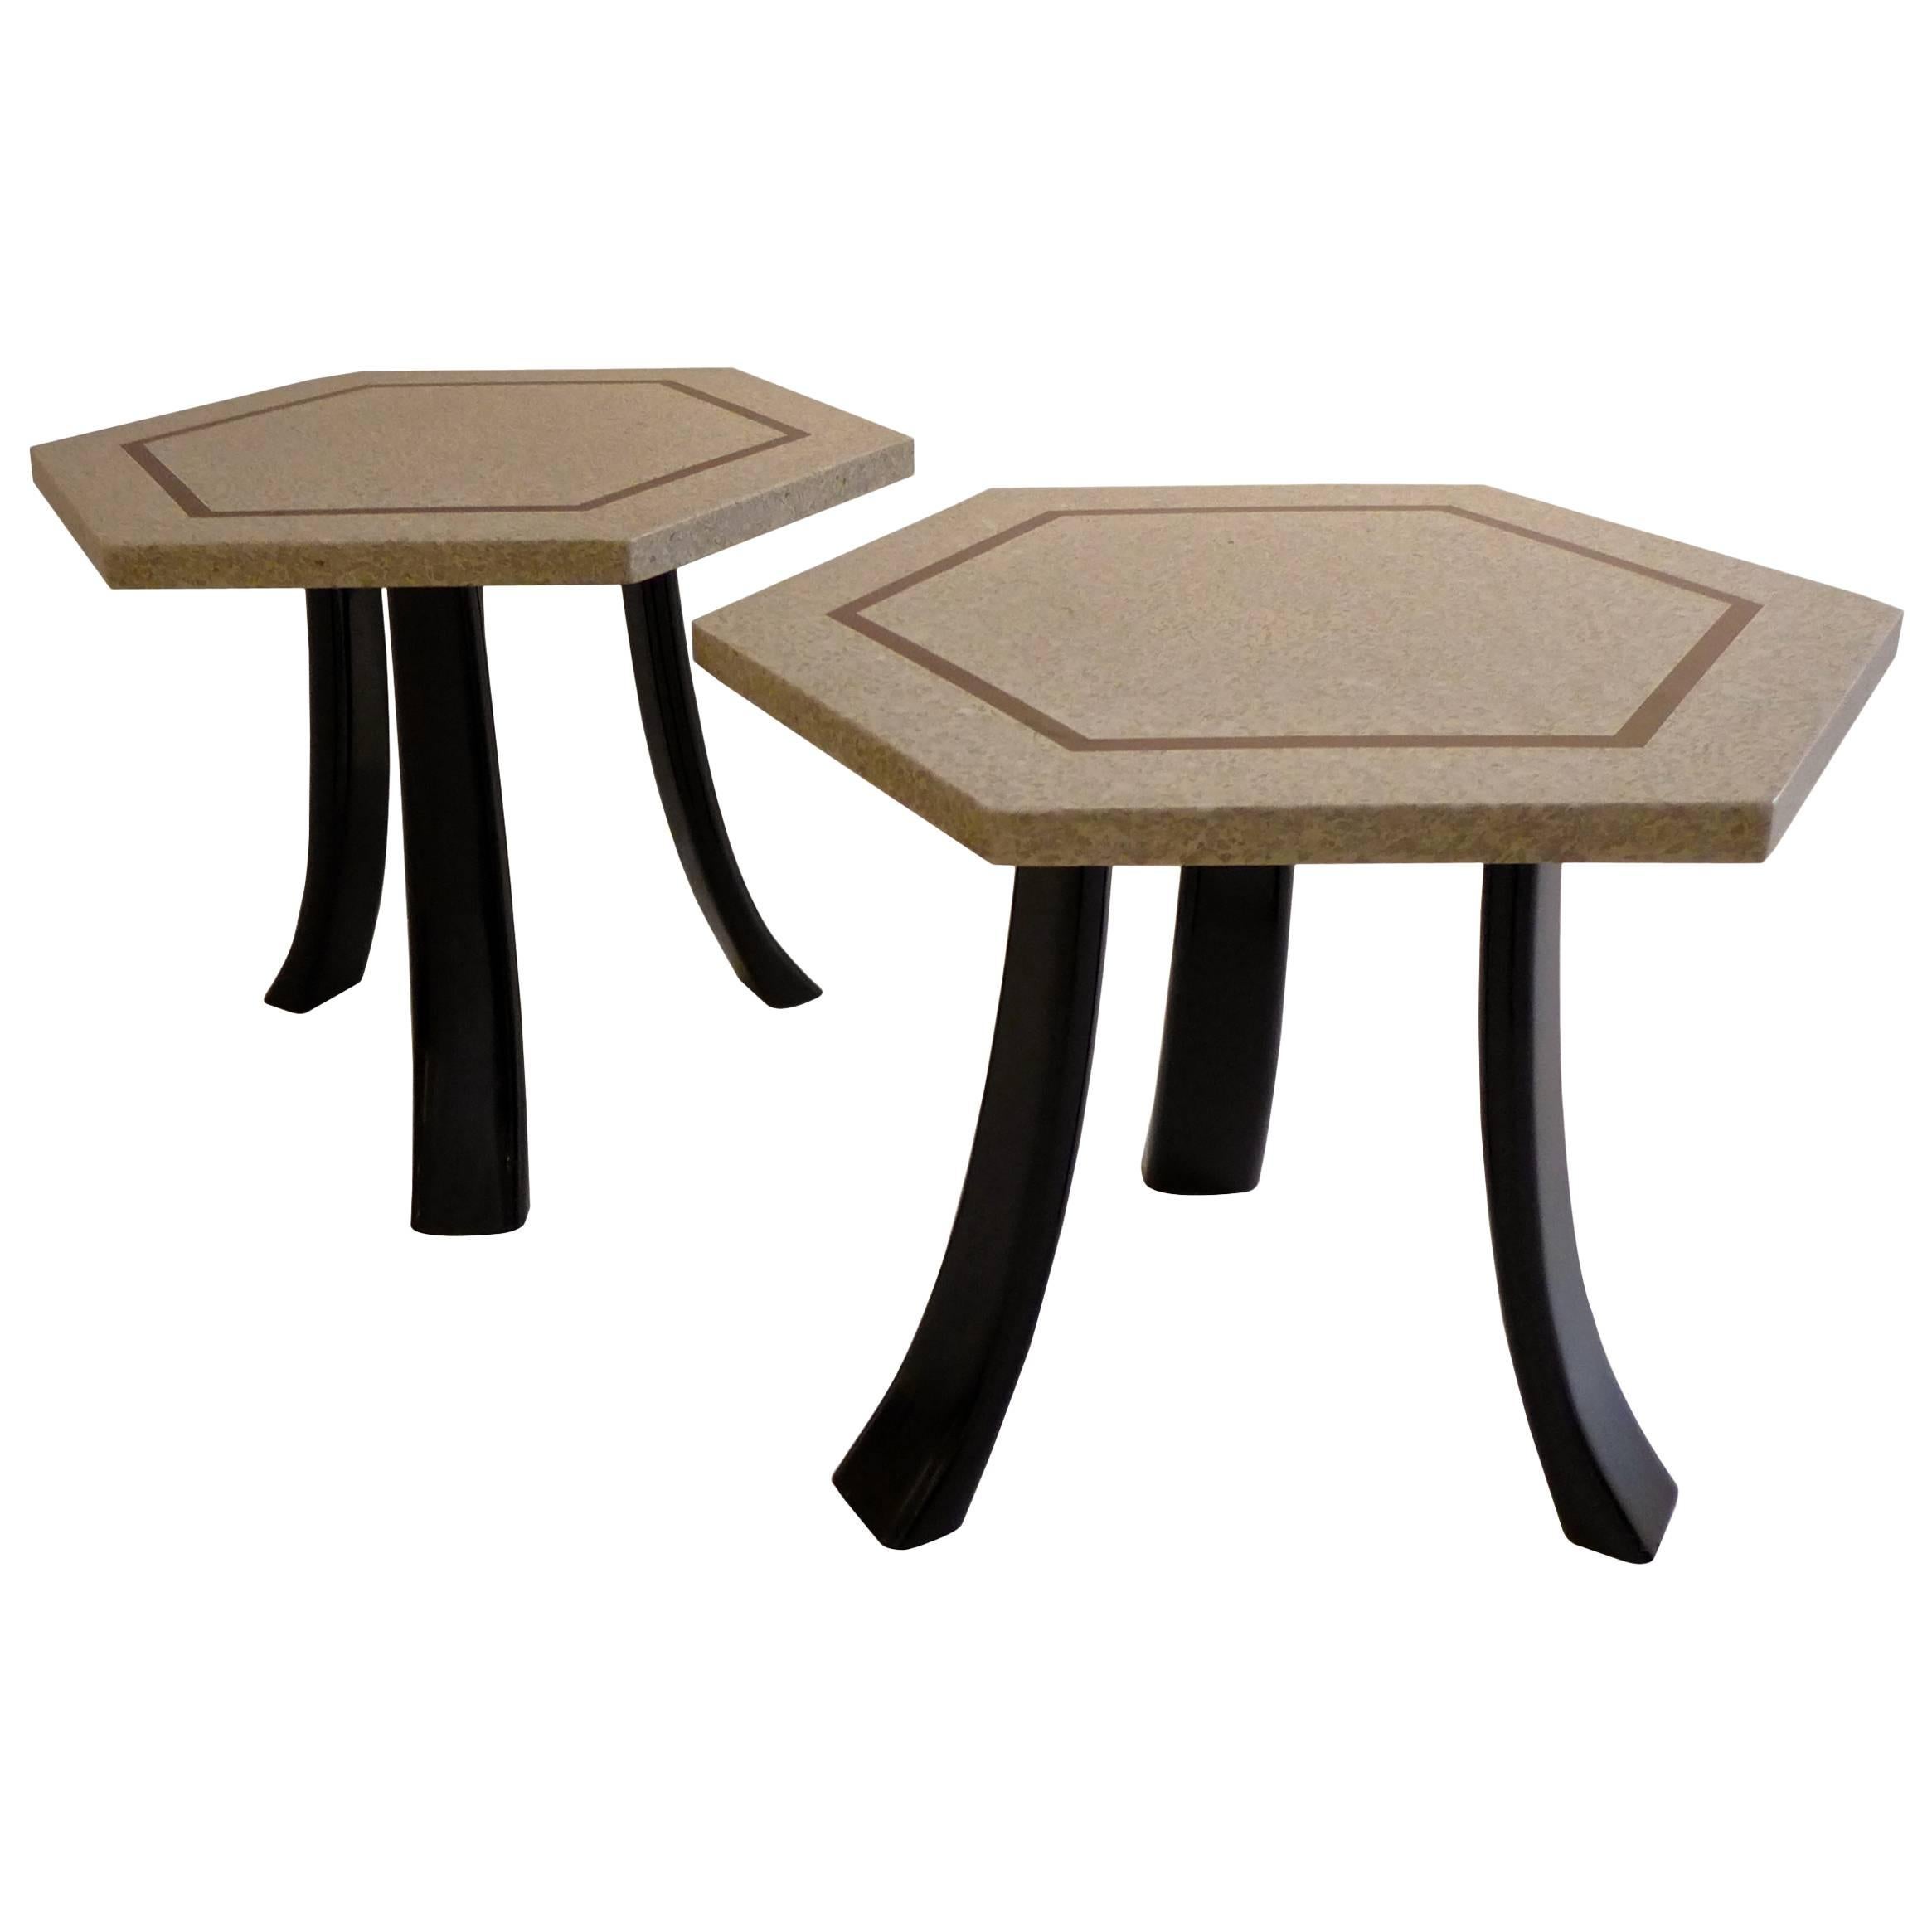 Pair of Hexagonal Harvey Probber Side Tables with Terrazzo Tops